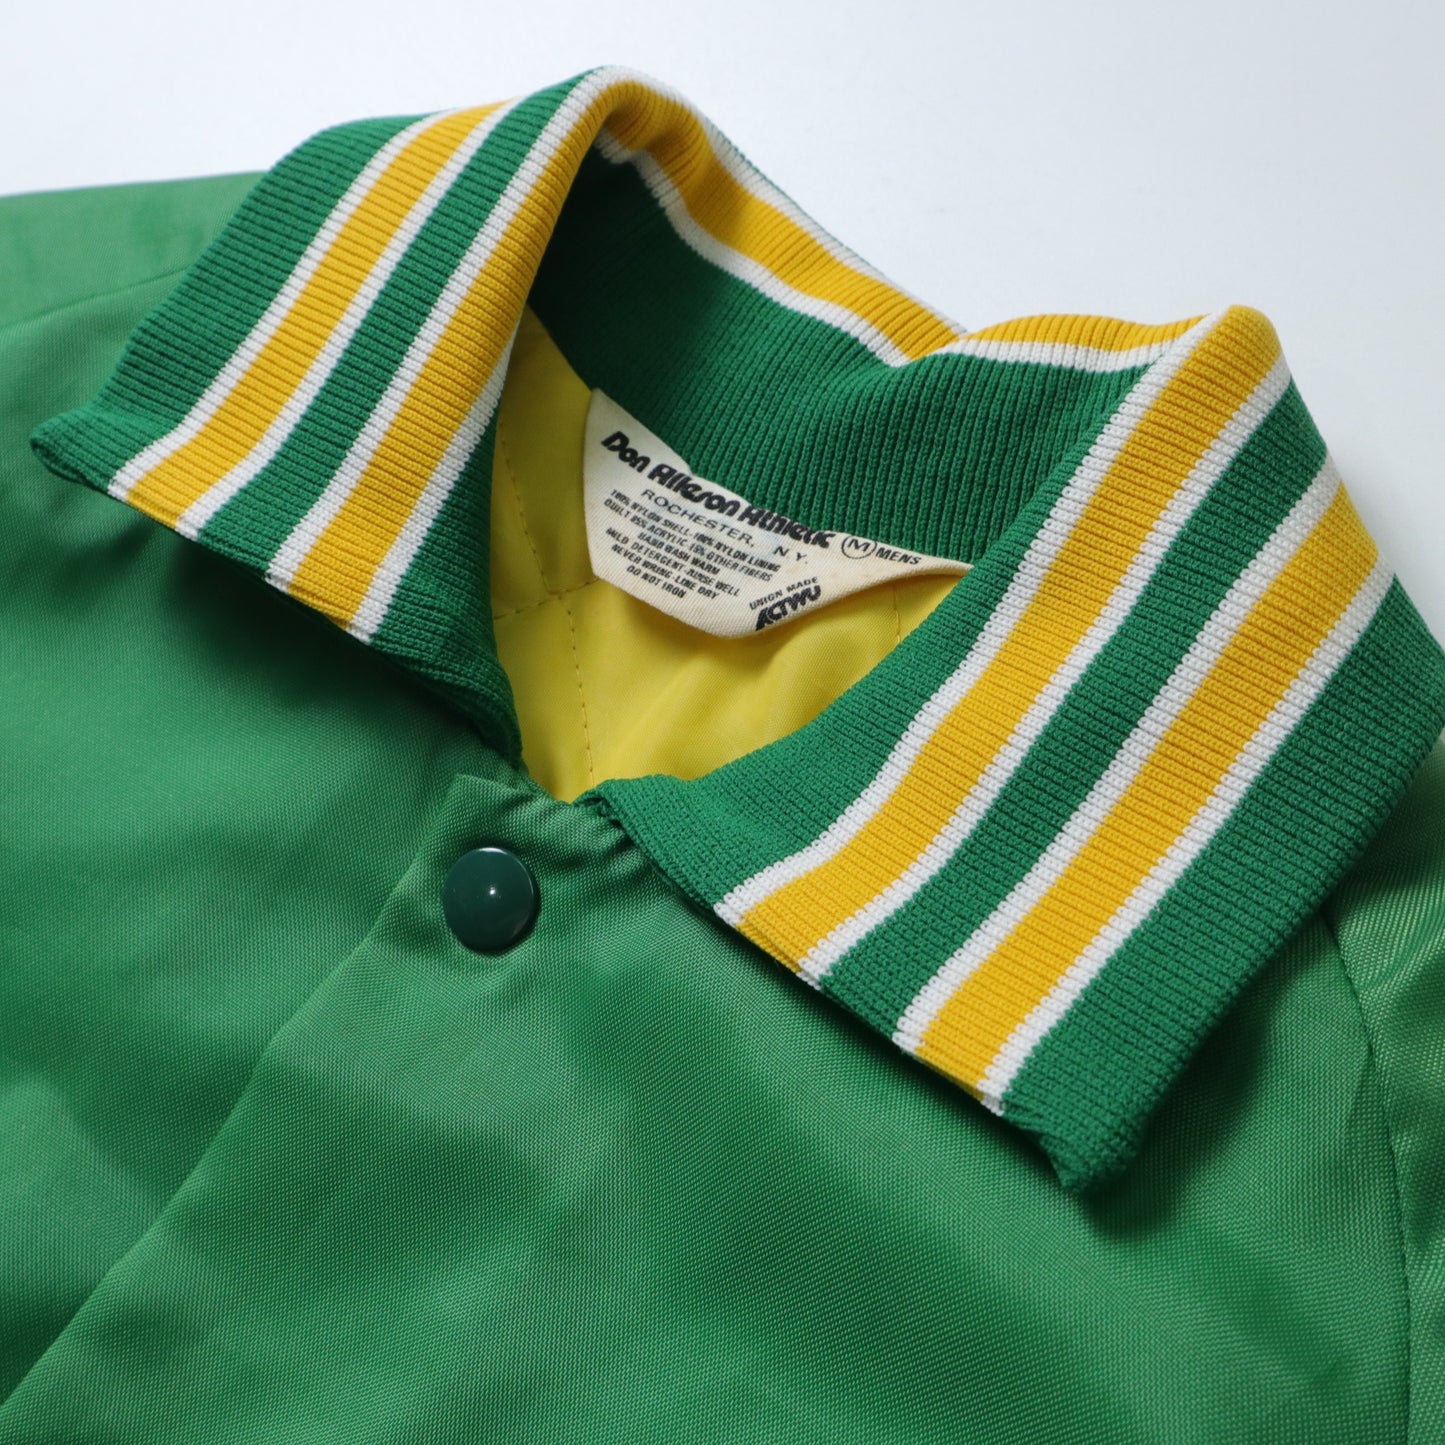 1980s American-made green windproof baseball jacket ACTWU Union made